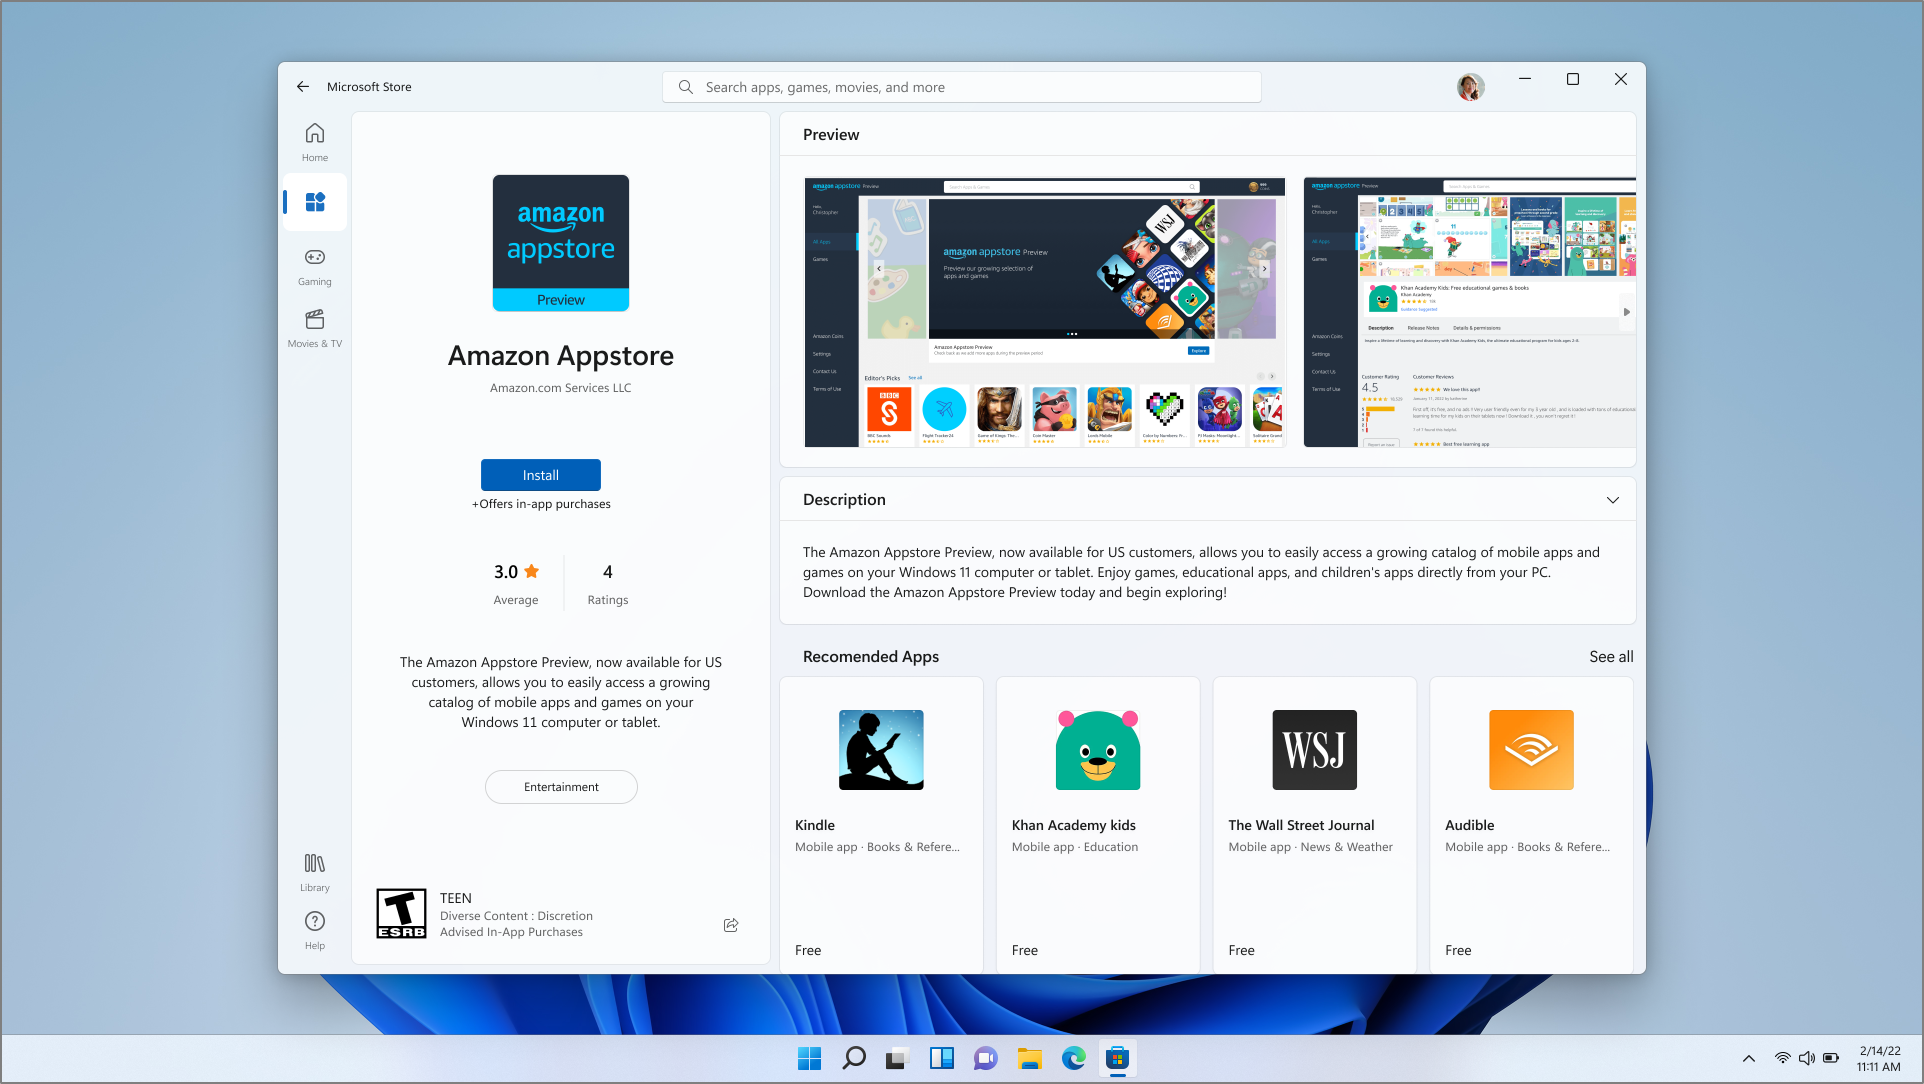 A screenshot of the Amazon Appstore download page in the Microsoft Store app.